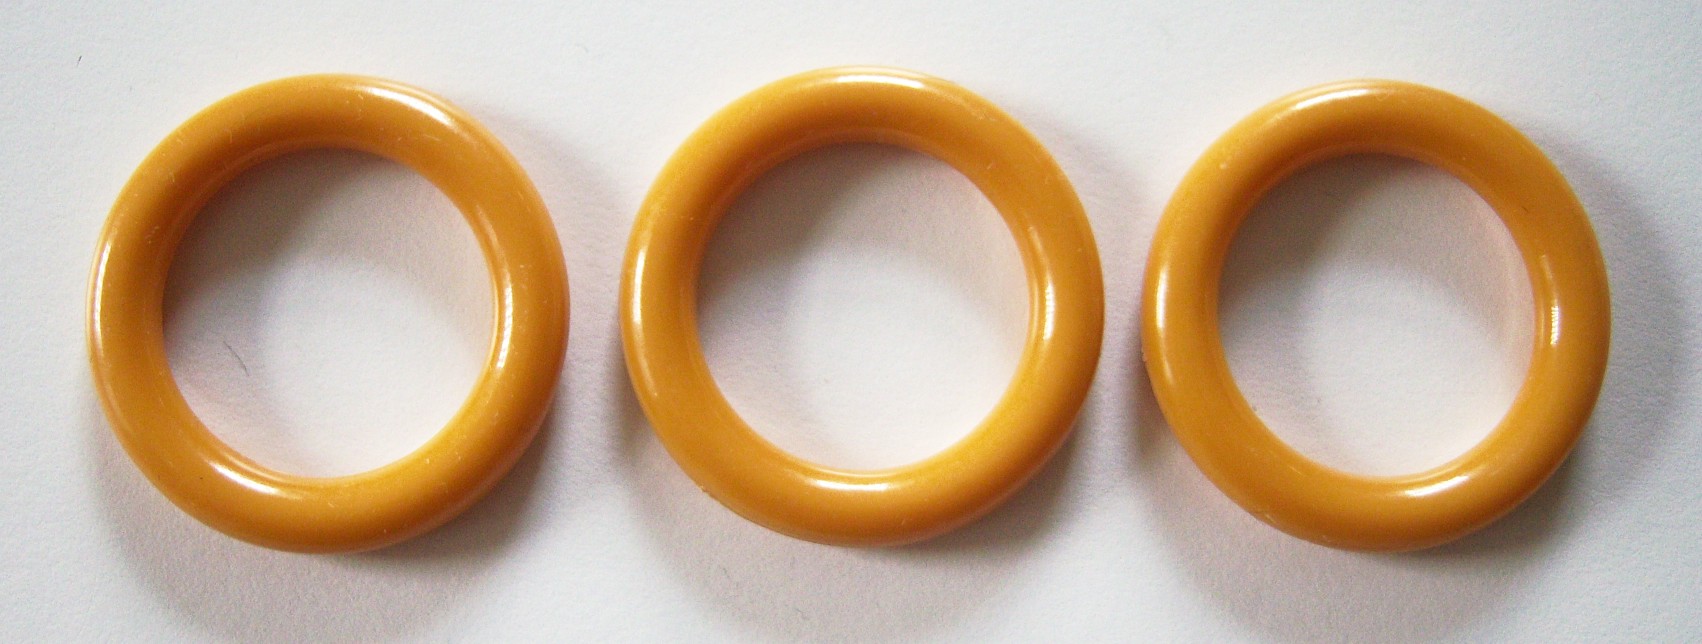 Ant. Gold Plastic 1" Rings 3 Pieces